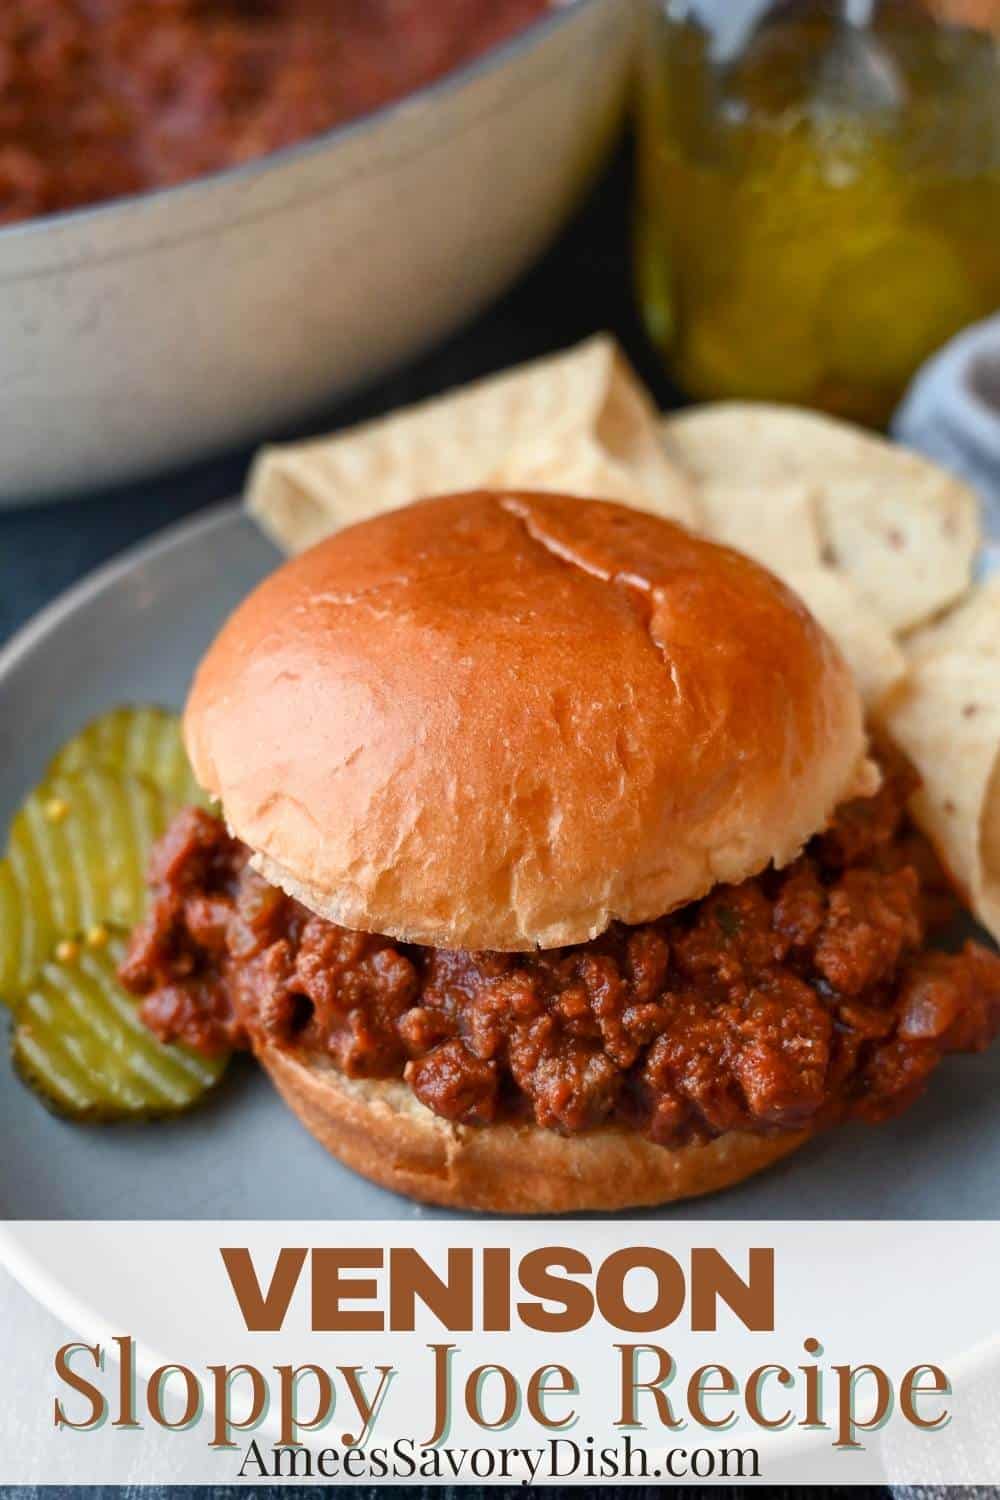 These Venison Sloppy Joes are a delicious twist on a timeless, kid-friendly food without sacrificing the nostalgic, meaty, and MESSY goodness we love! via @Ameessavorydish